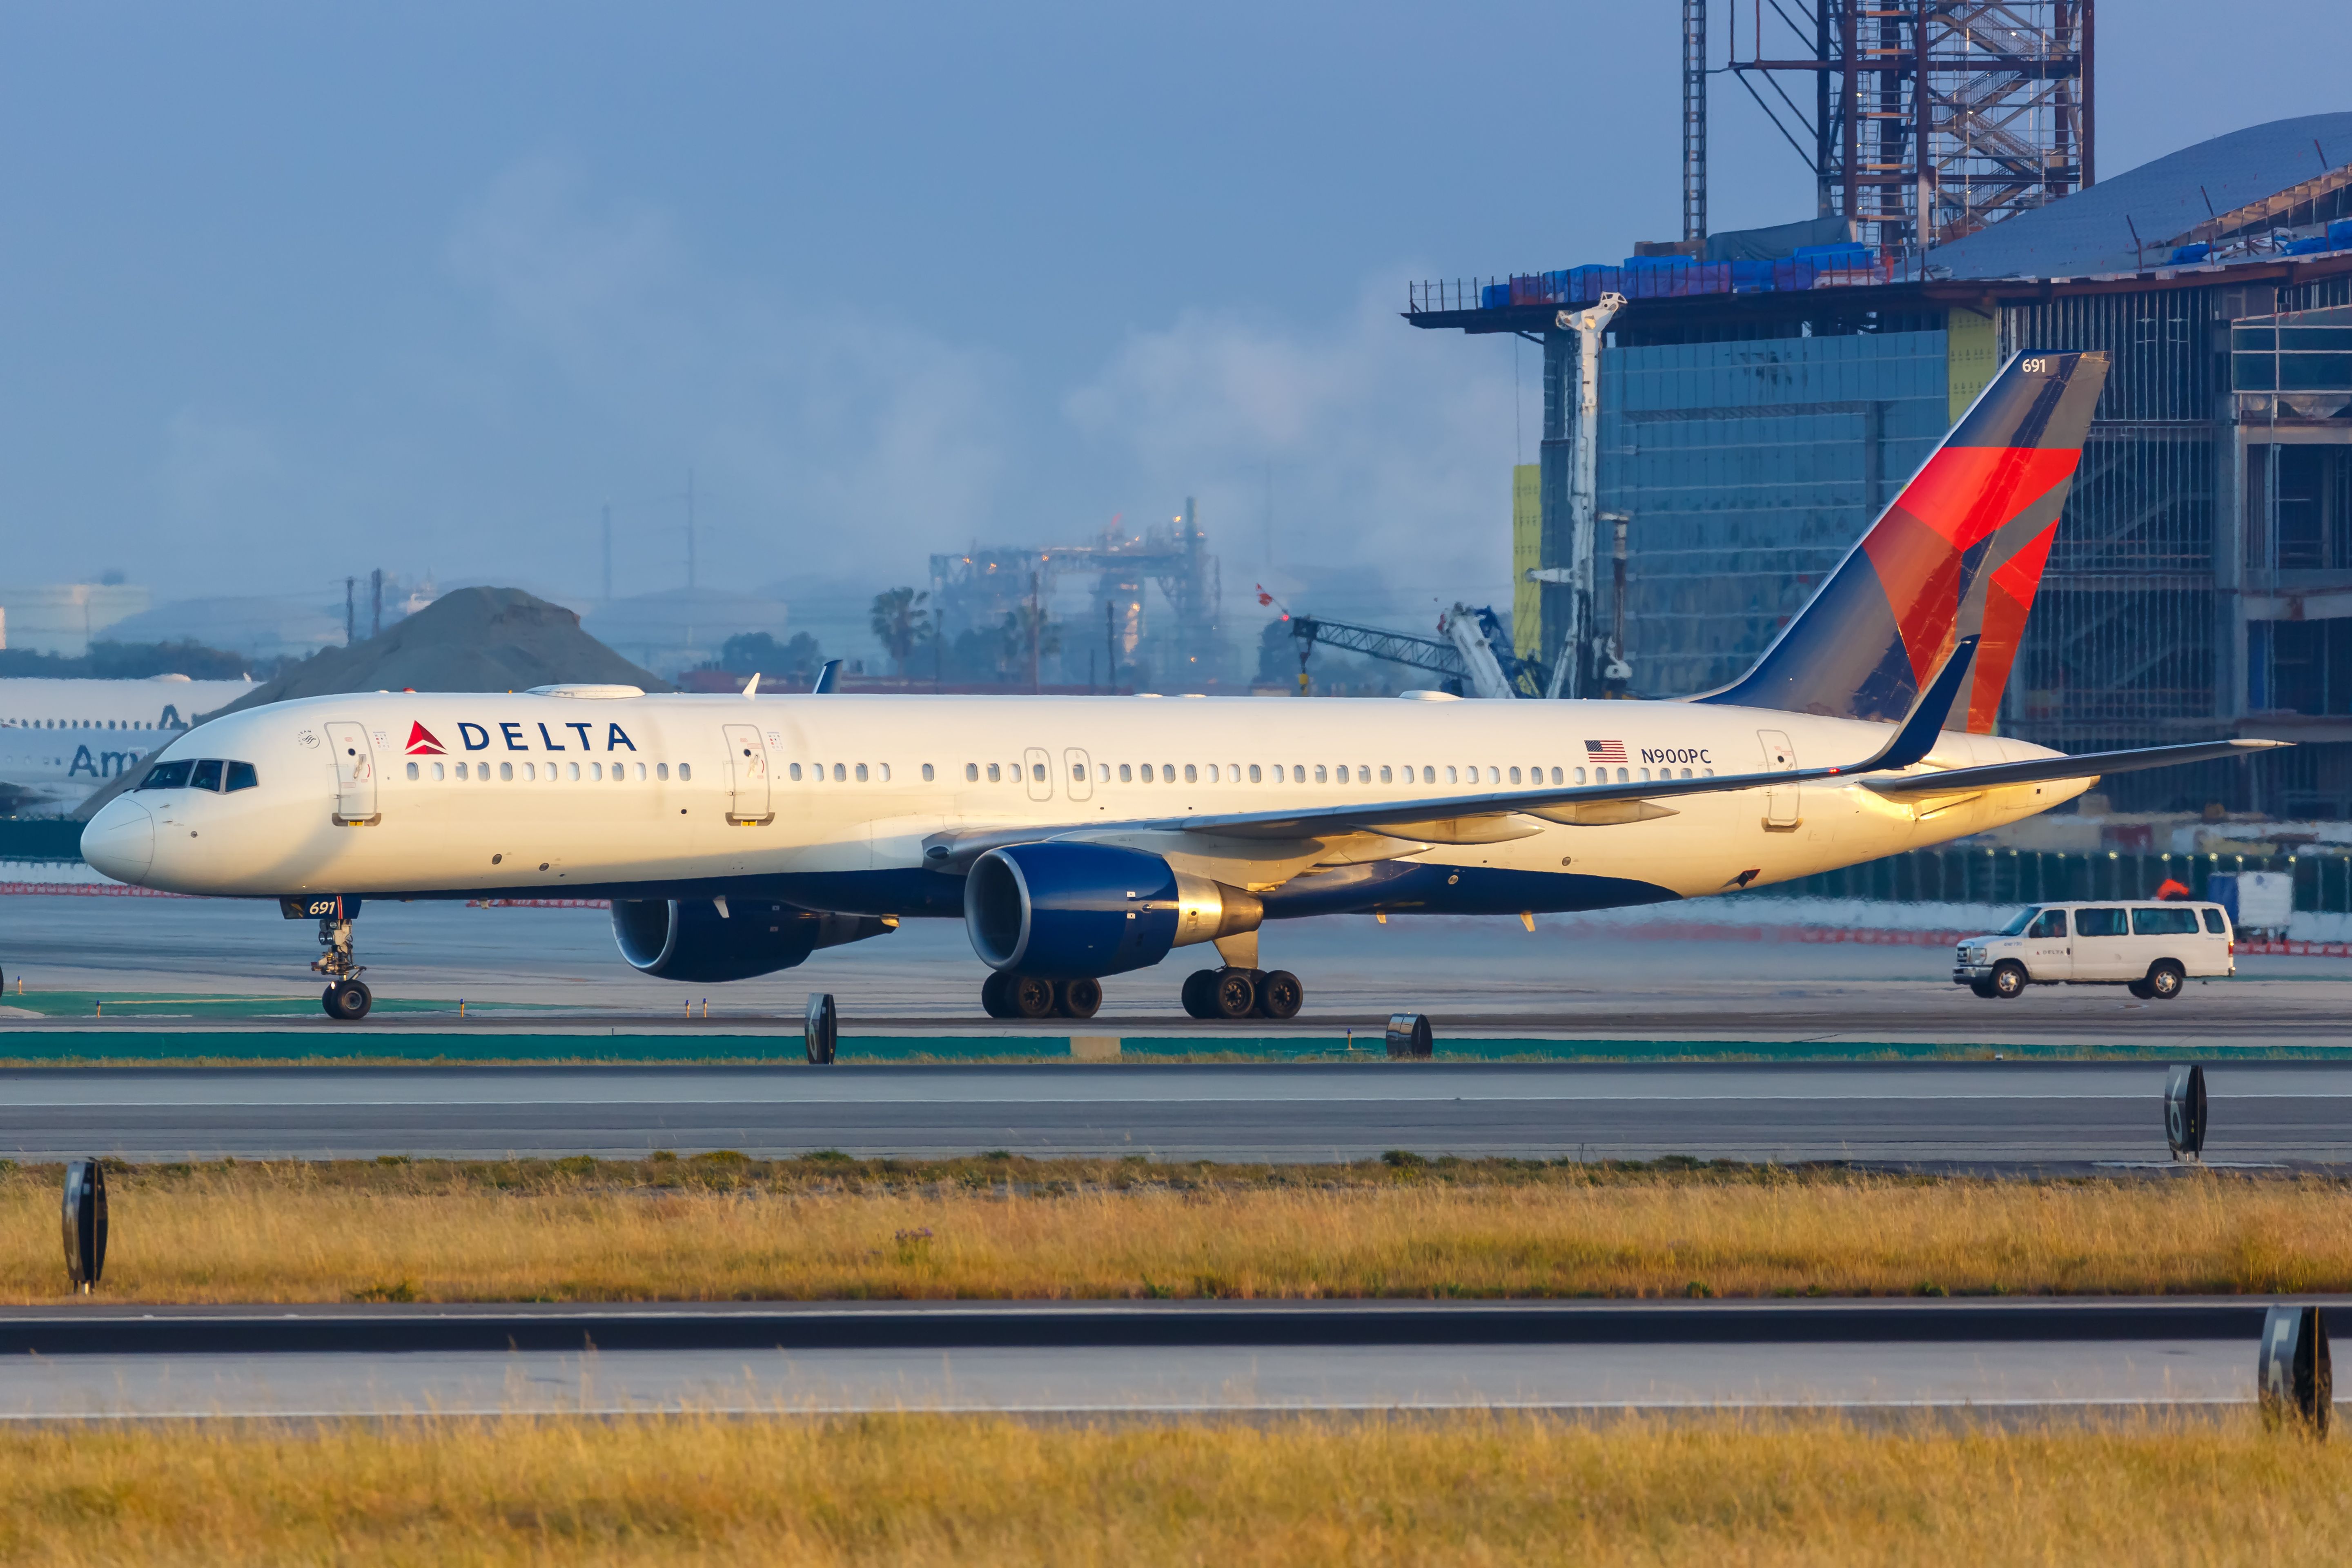  Delta Air Lines Boeing 757-200 airplane at Los Angeles international airport (LAX)